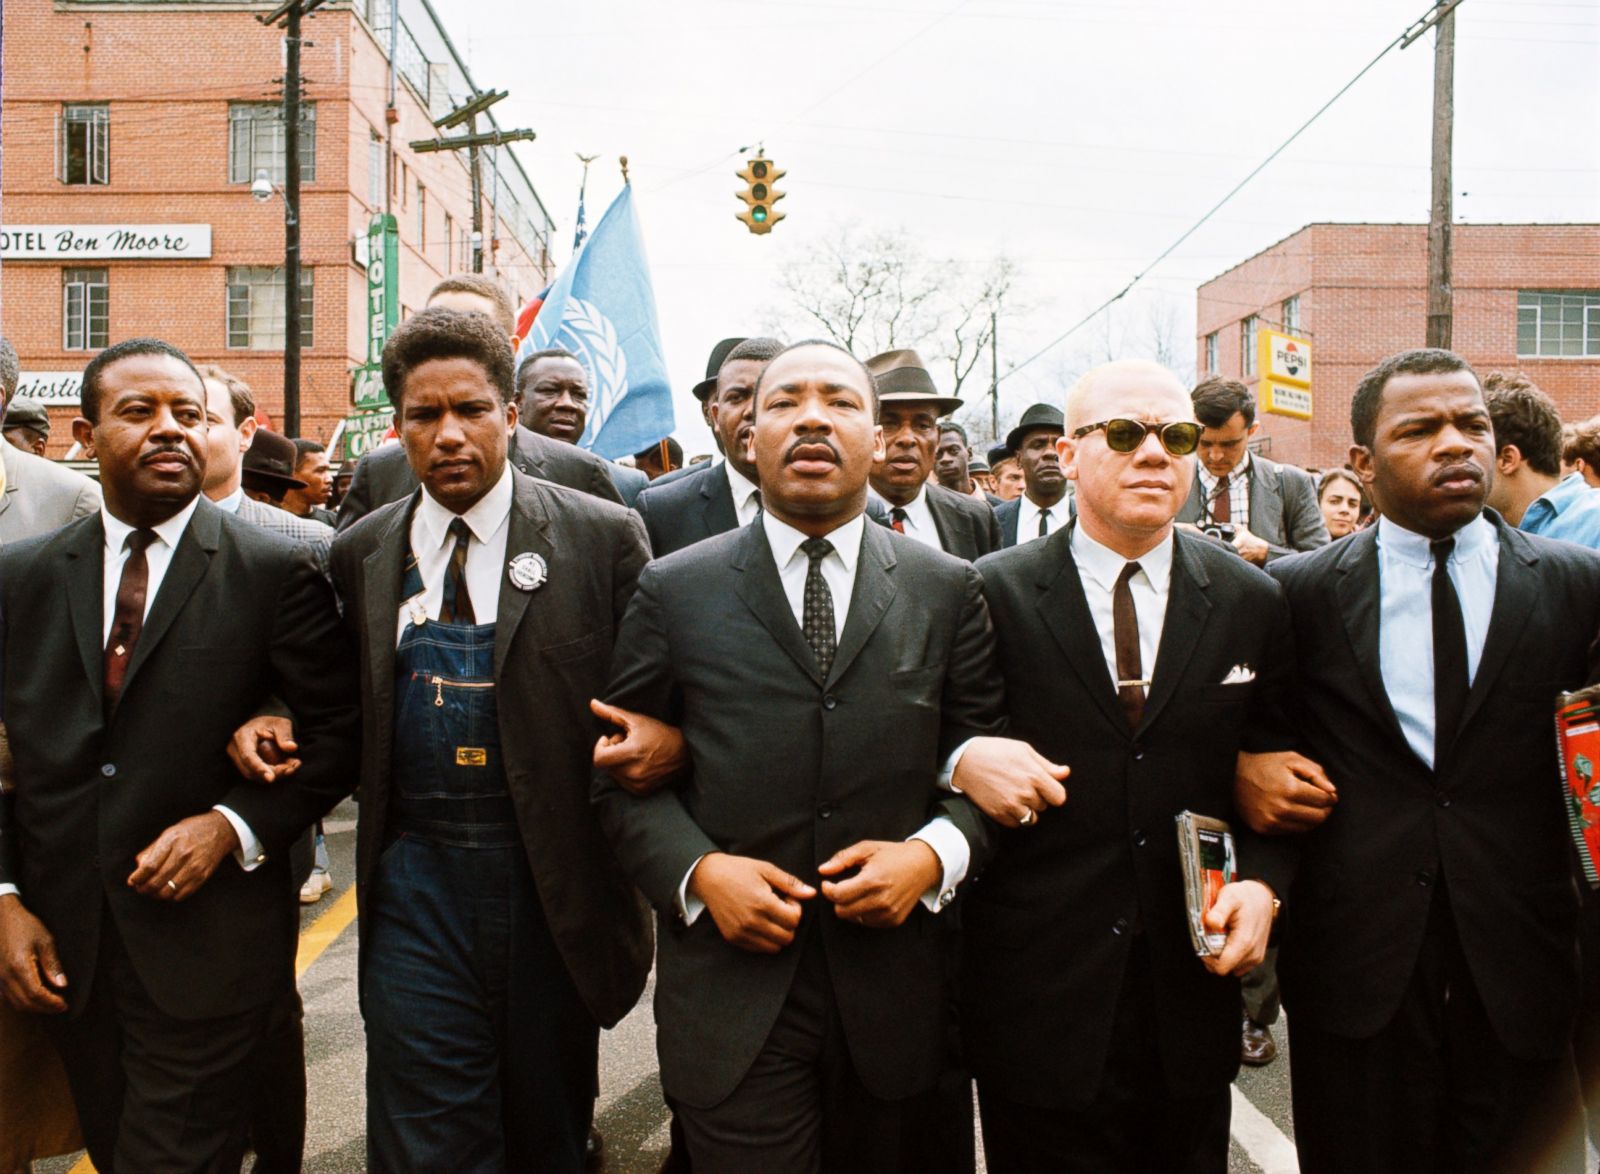 What Role Did Television Play In The Civil Rights Movement?